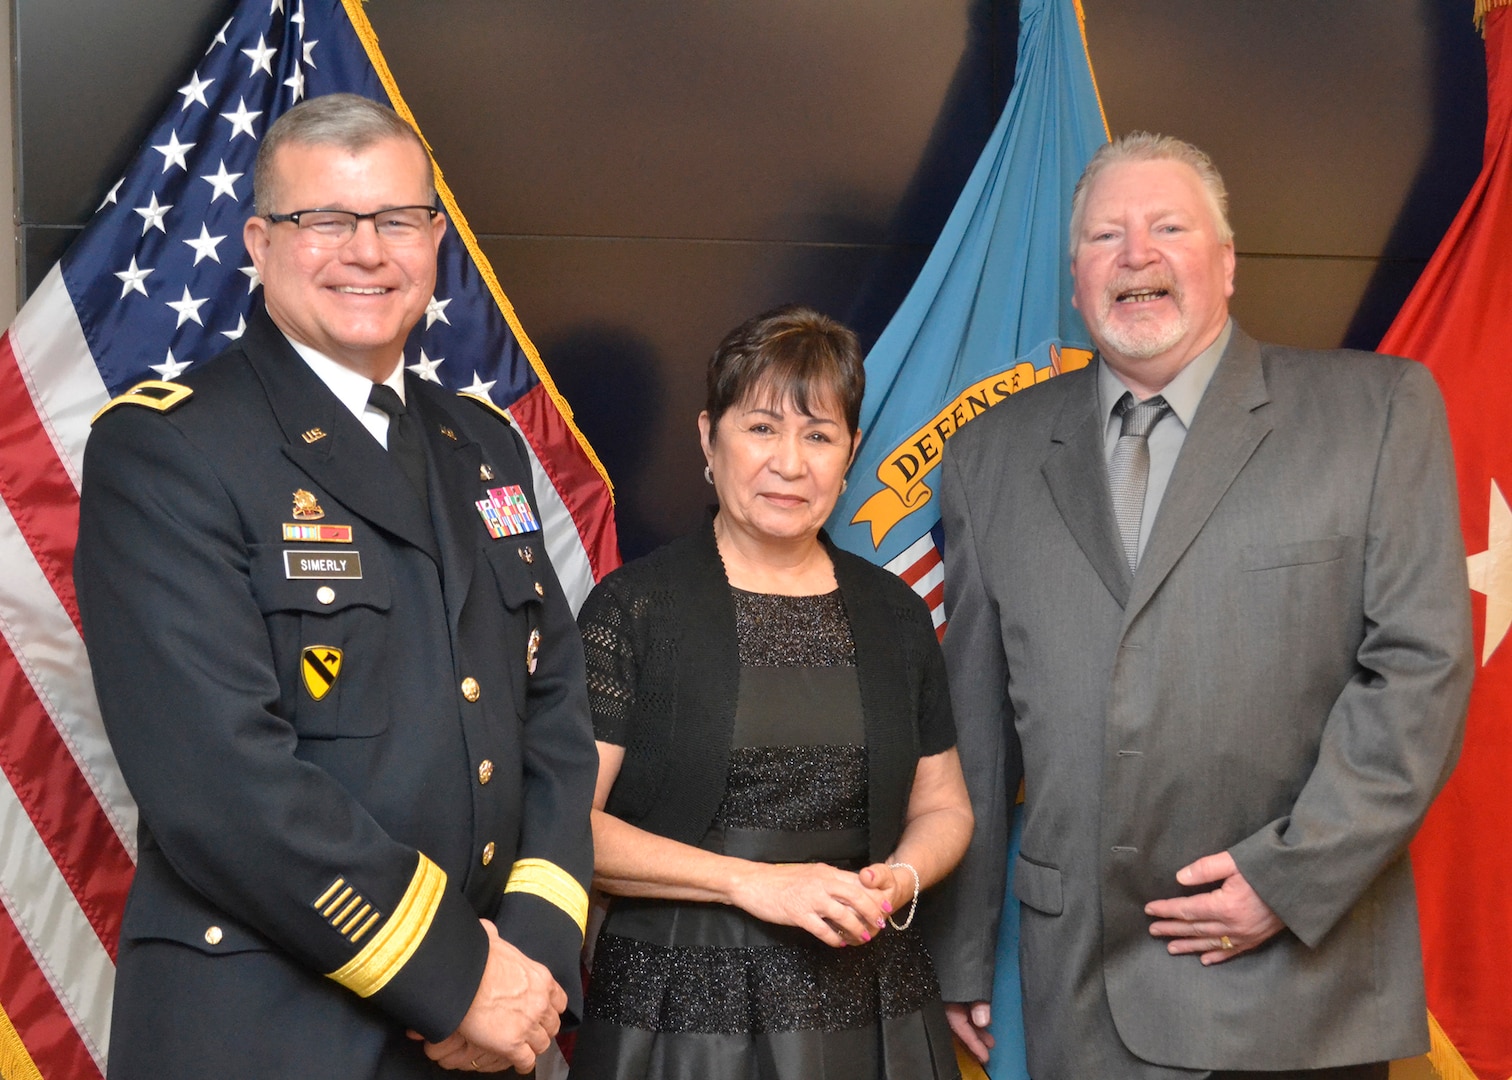 Photo. Dewey Smith, an equal employment specialist, and Nereida Rivera, a hand embroidery fabric worker, were honored during a retirement ceremony March 29. The retirees have 43 years of combined federal service.